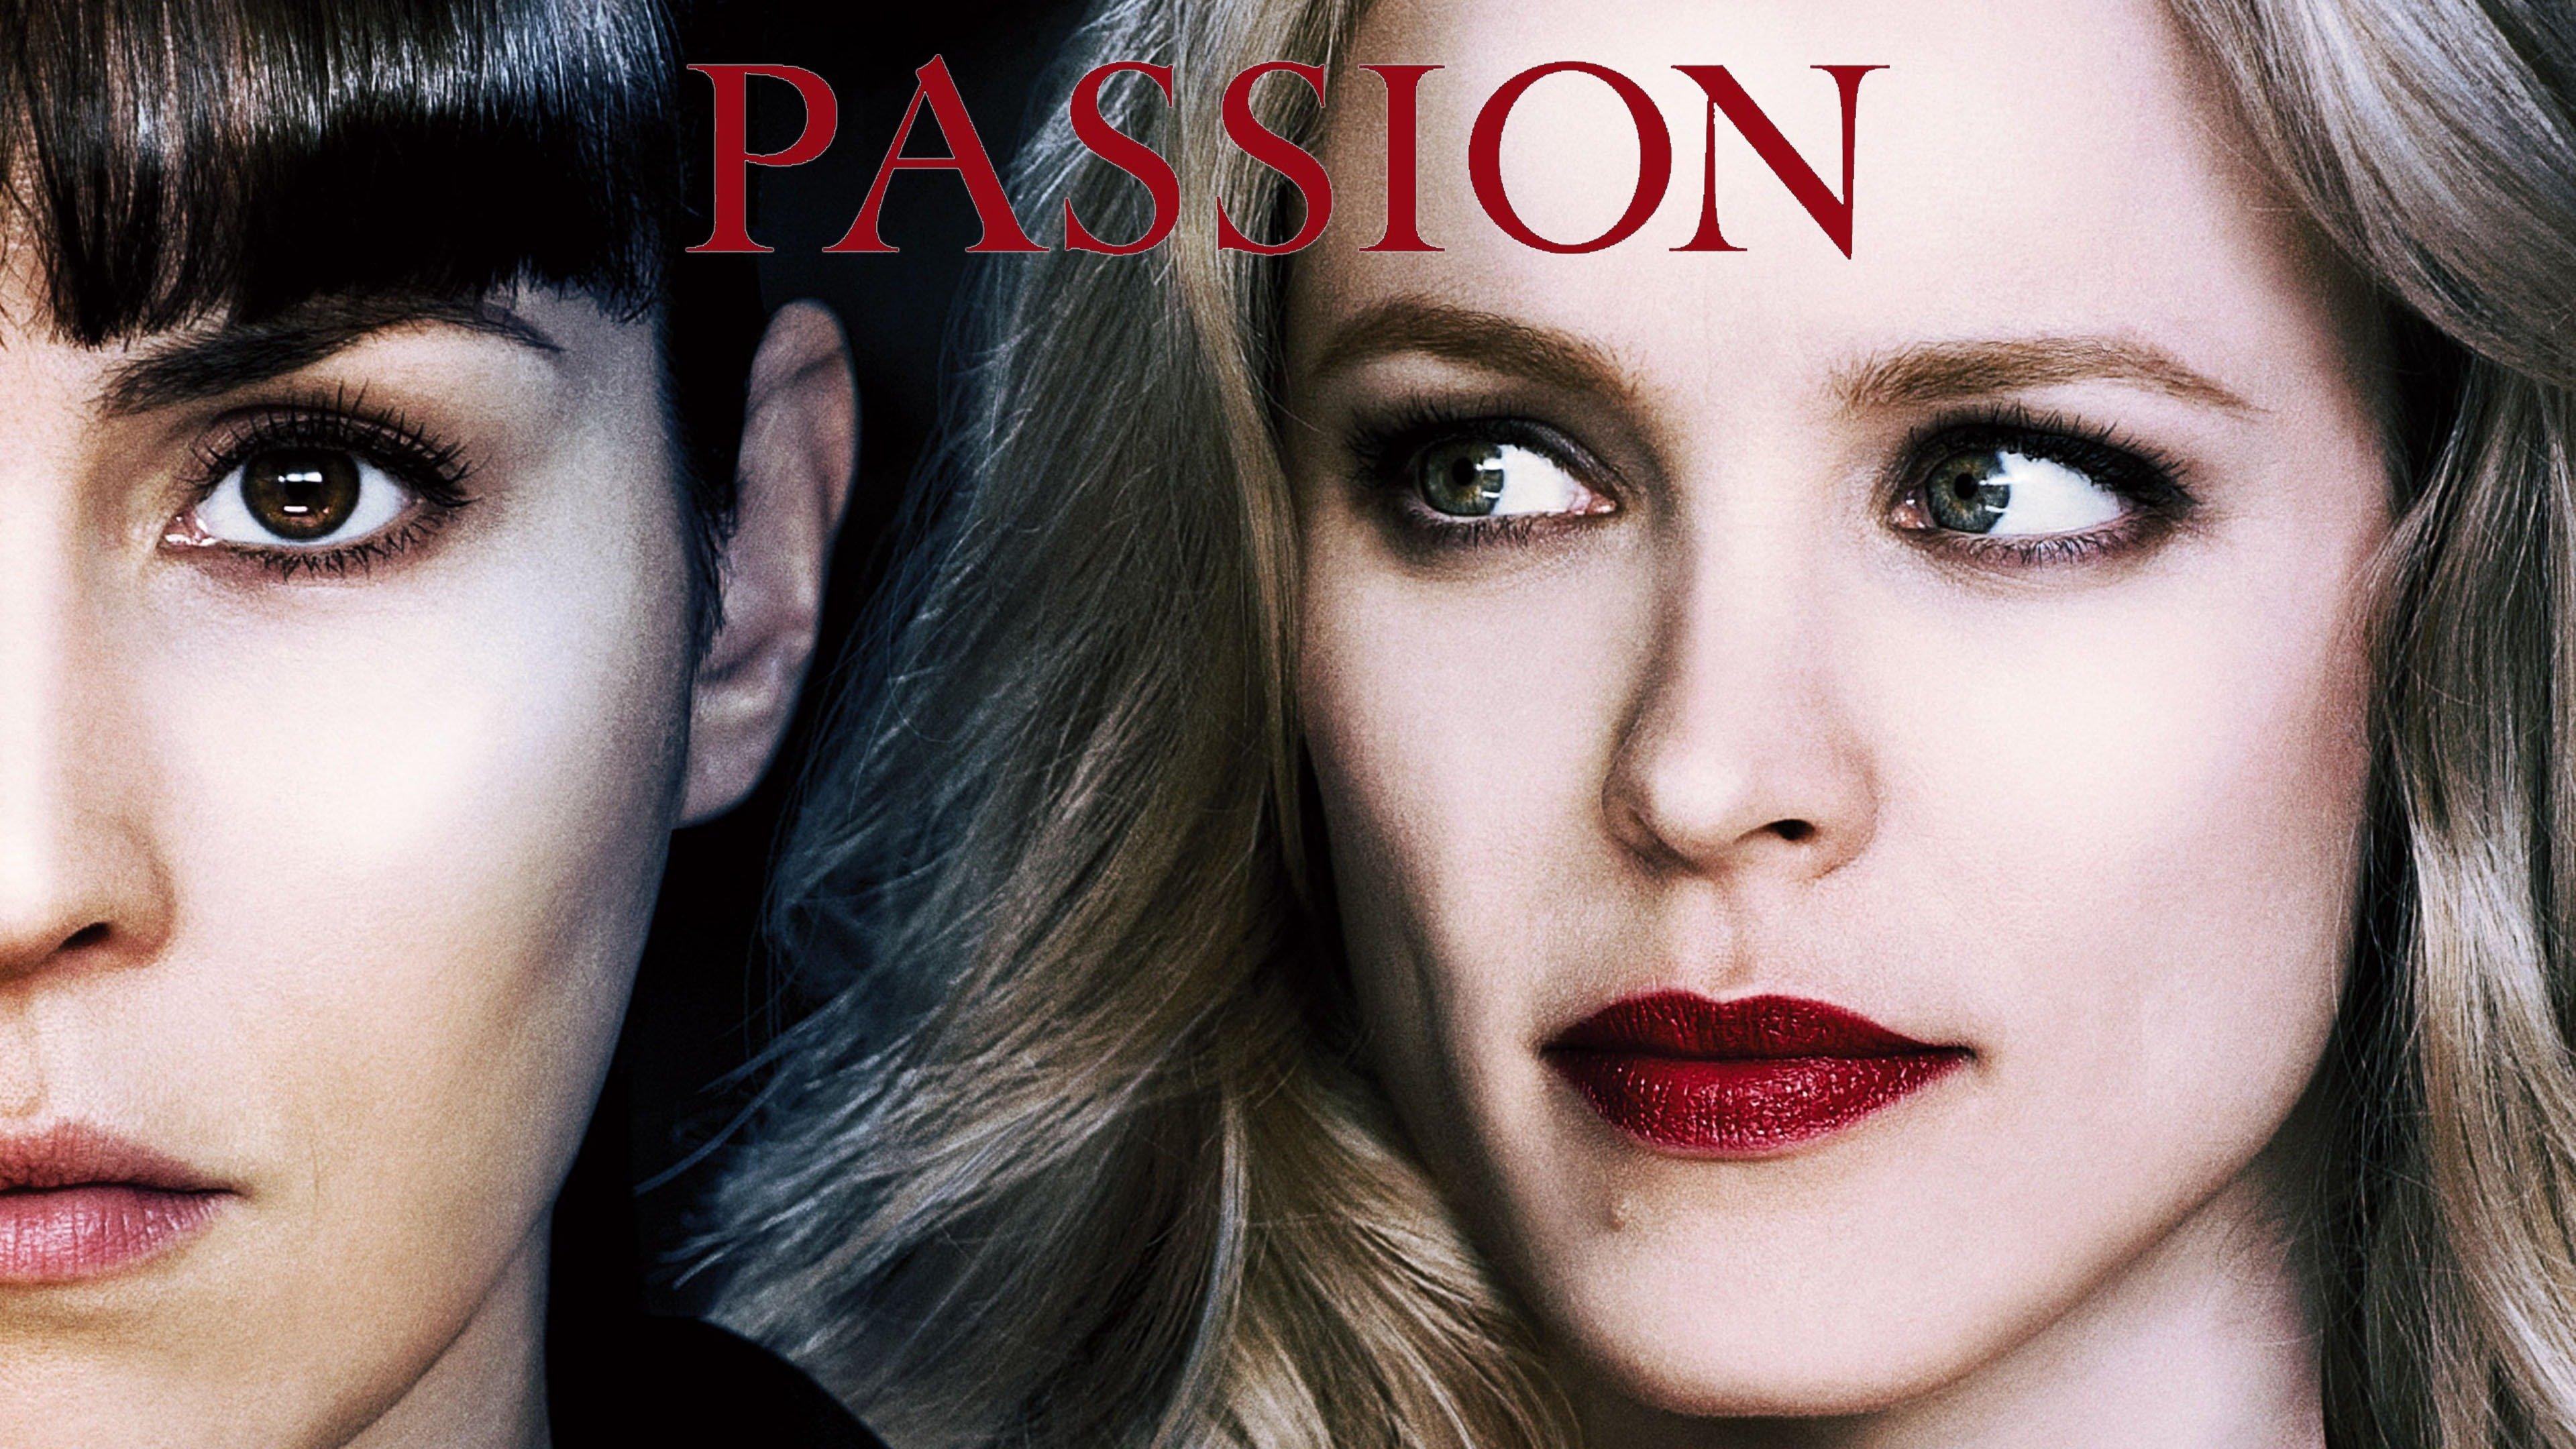 Watch Passion Streaming Online On Philo Free Trial